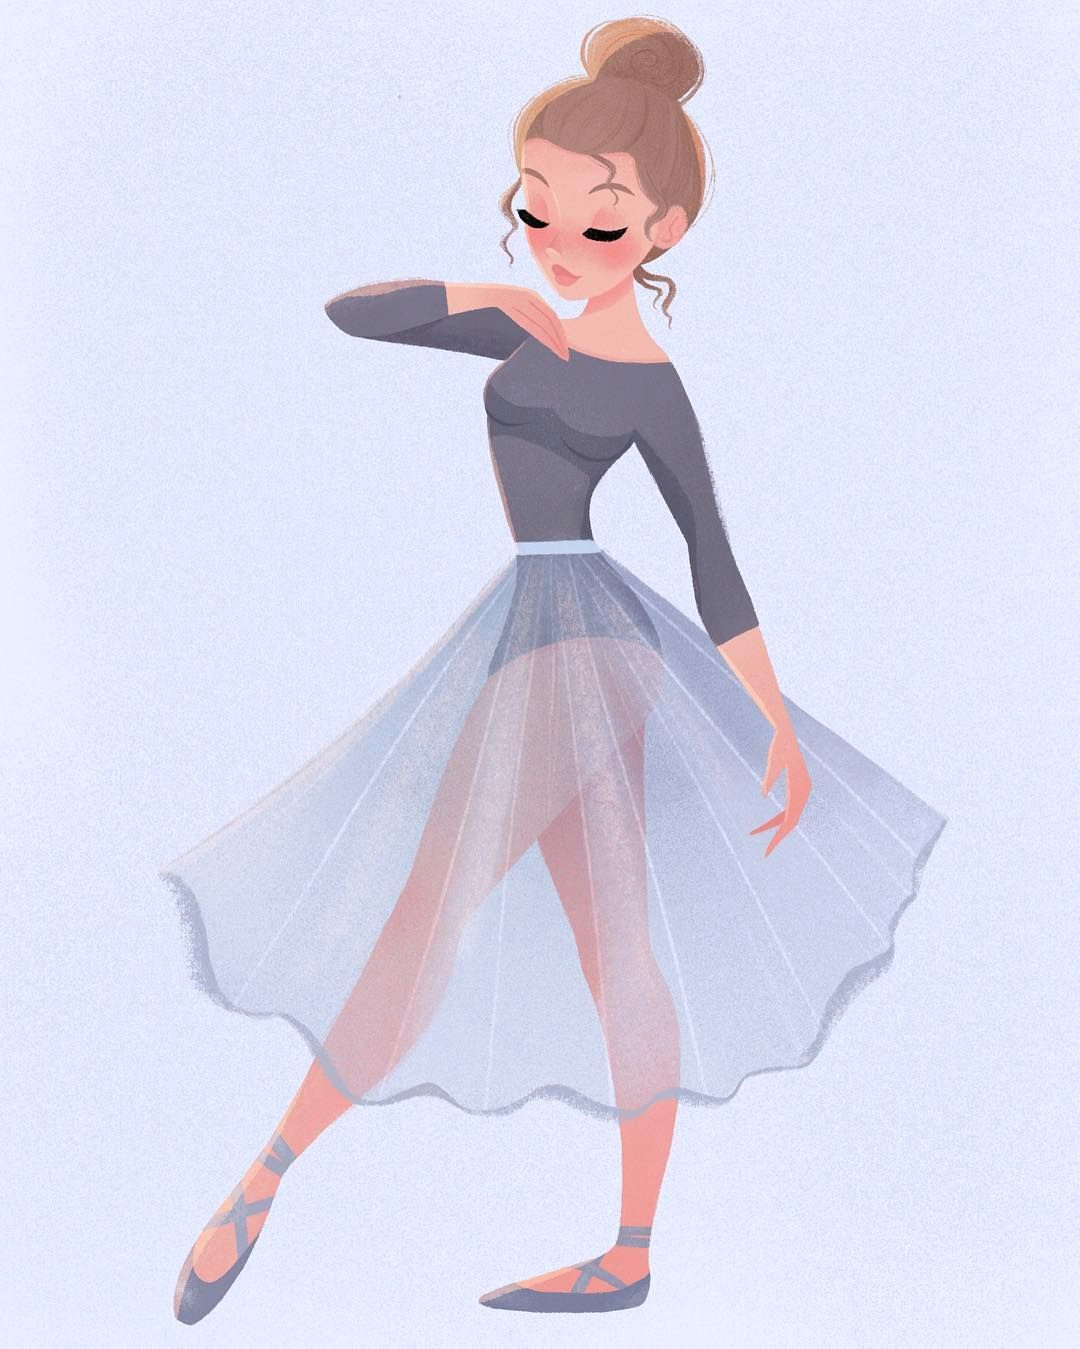 Animated Things to Draw Drawing Ballerinas is My All Time Favourite Thing to Draw